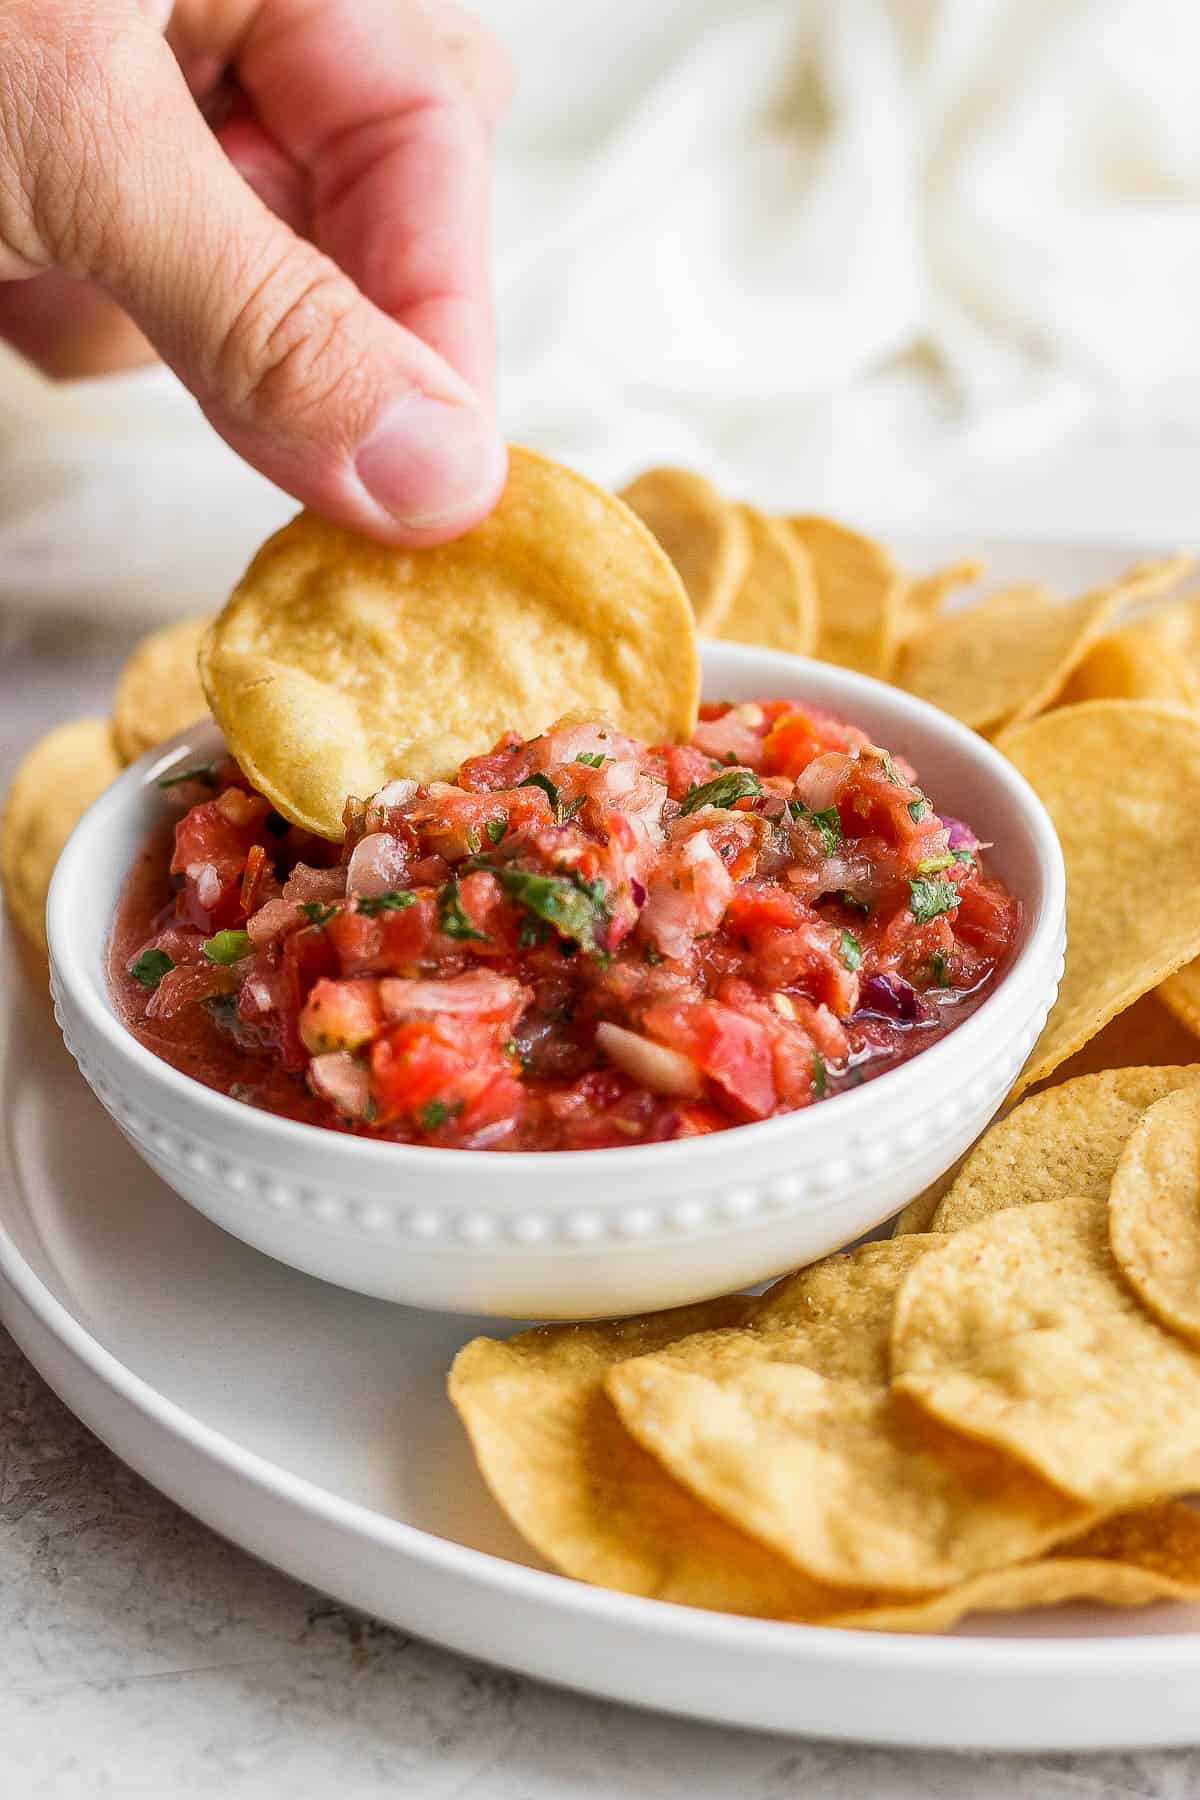 Someone dipping a chip into some salsa.